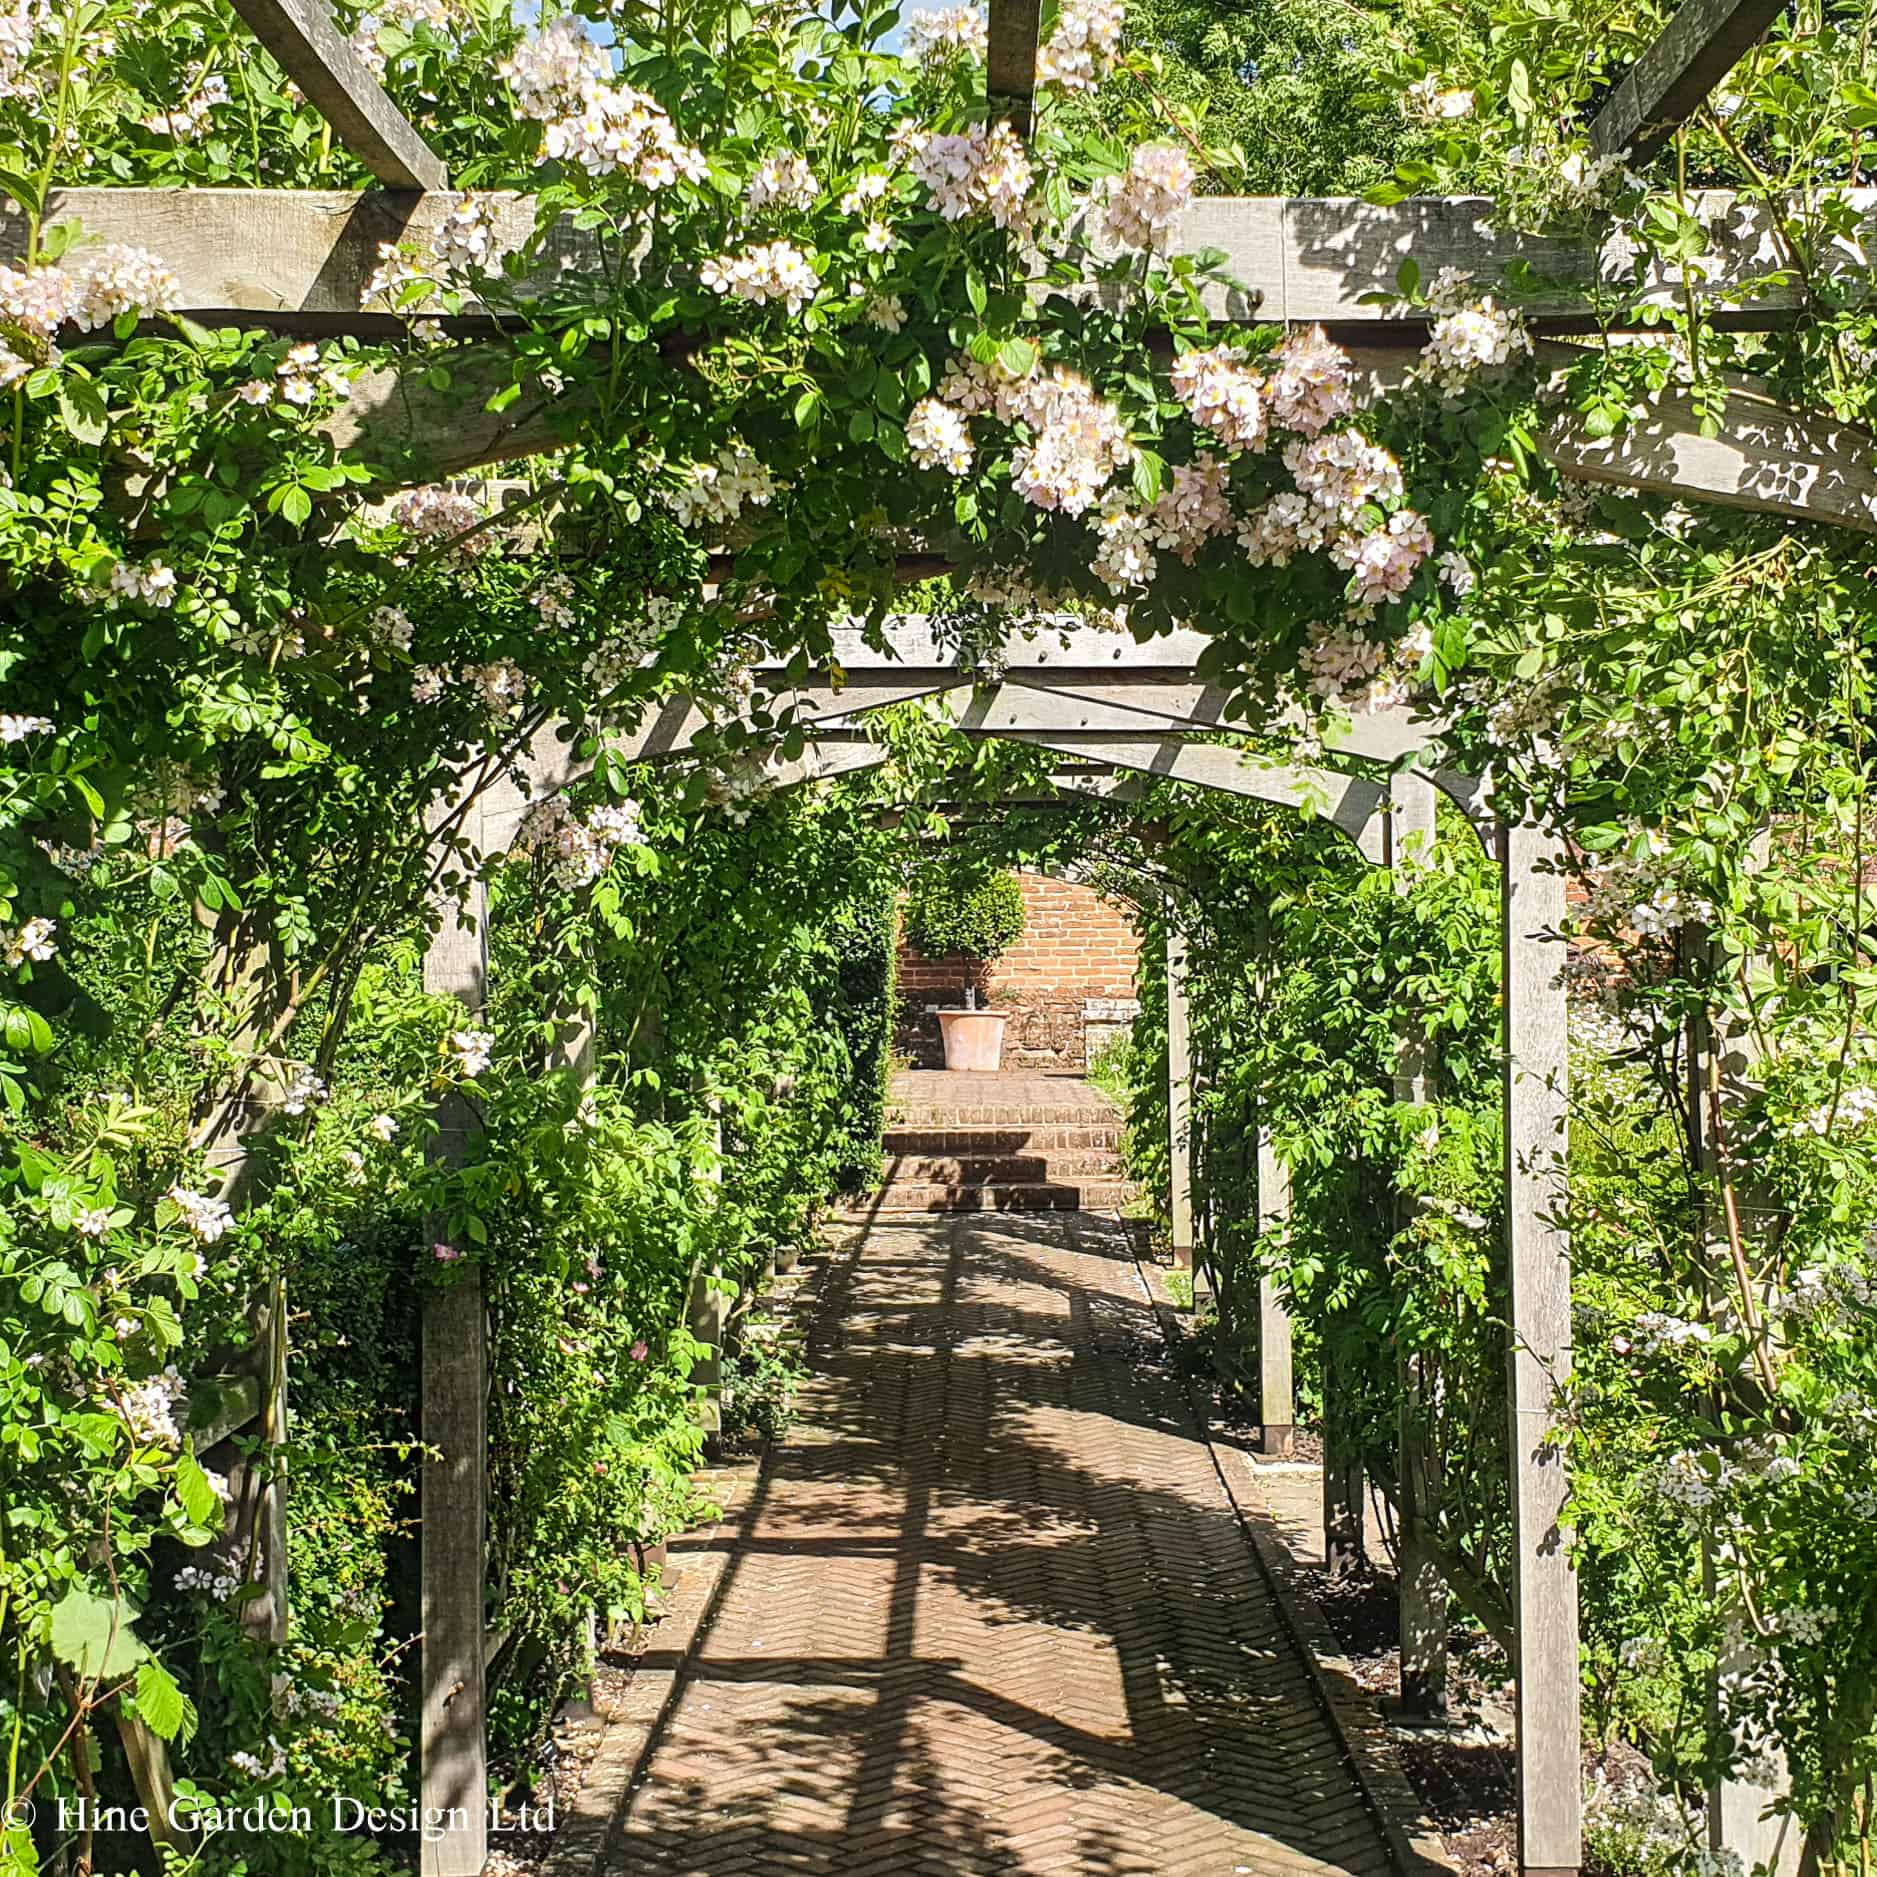 Faded timber rose pergola, a few meters long and covered in pale pink blooming roses.